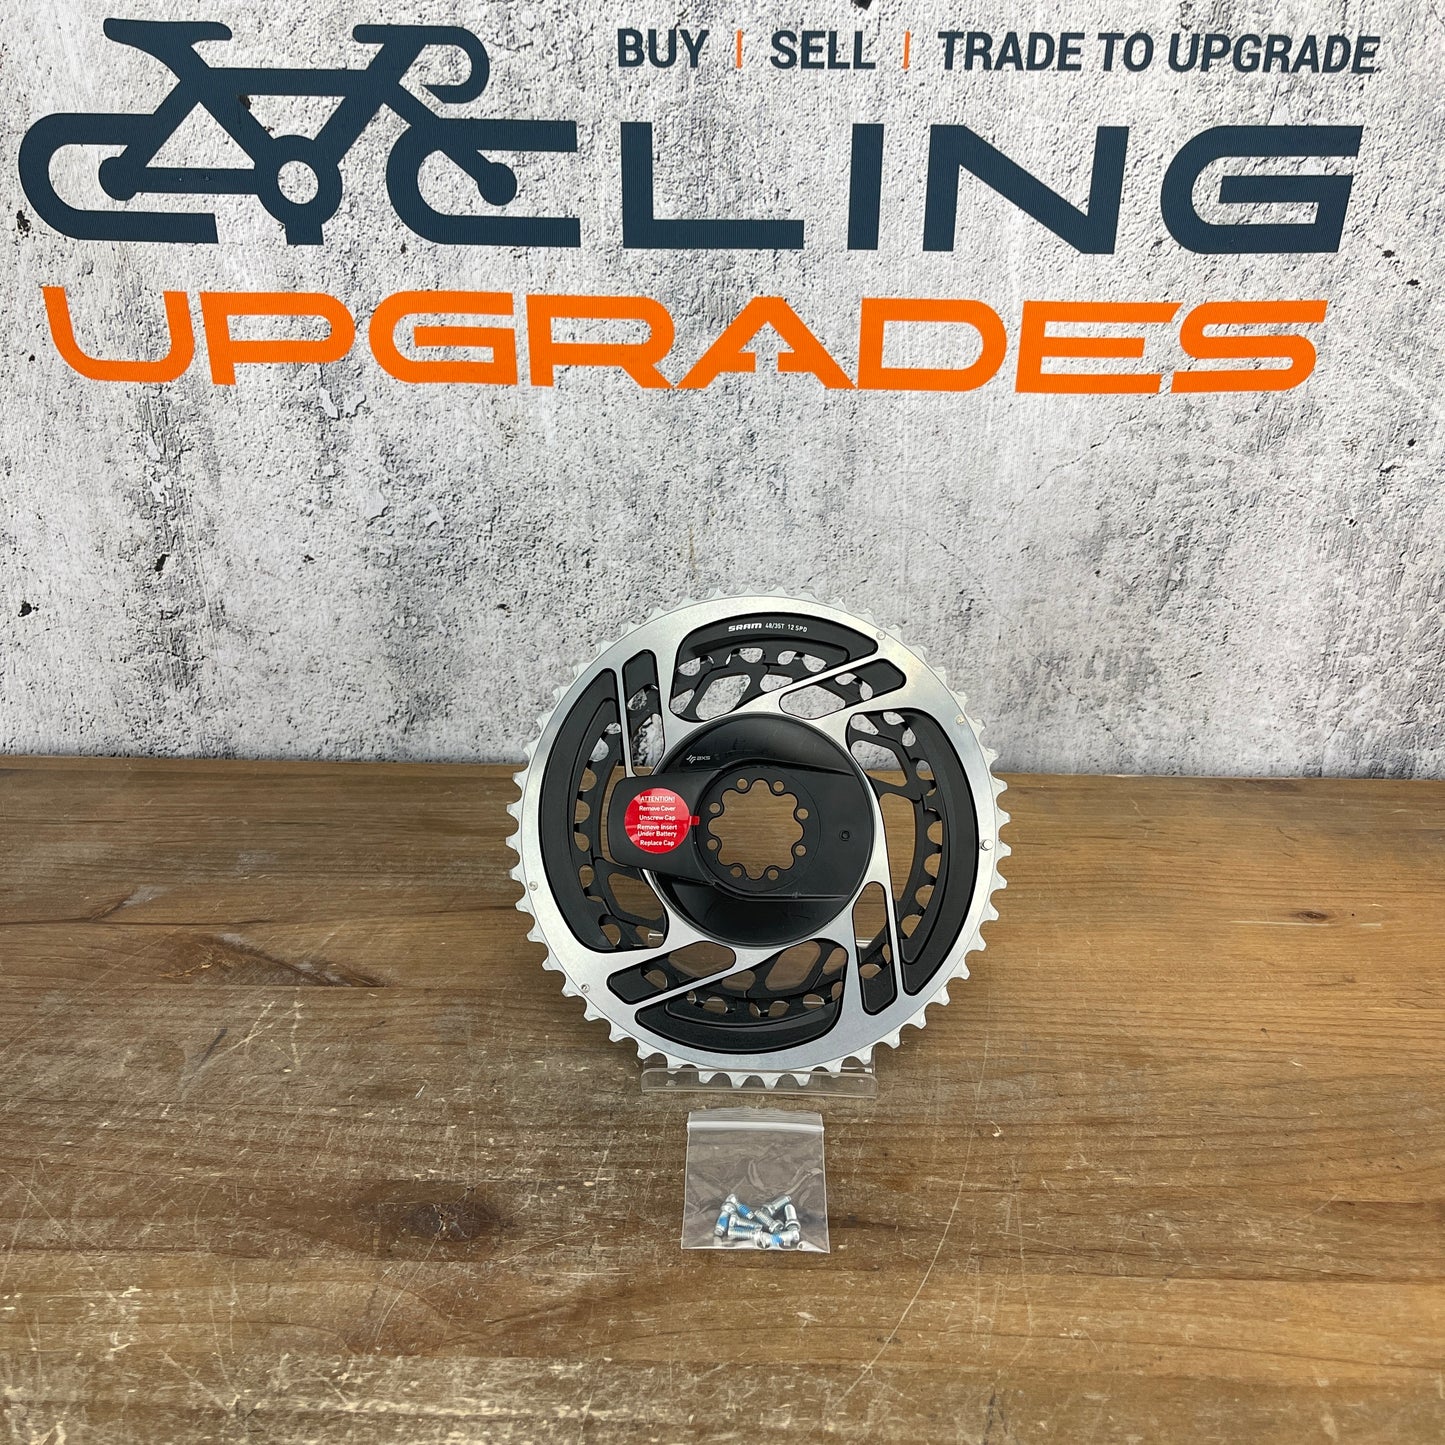 Low Mile SRAM Red AXS Quarq 48/35t 12-Speed Power Meter Chainrings